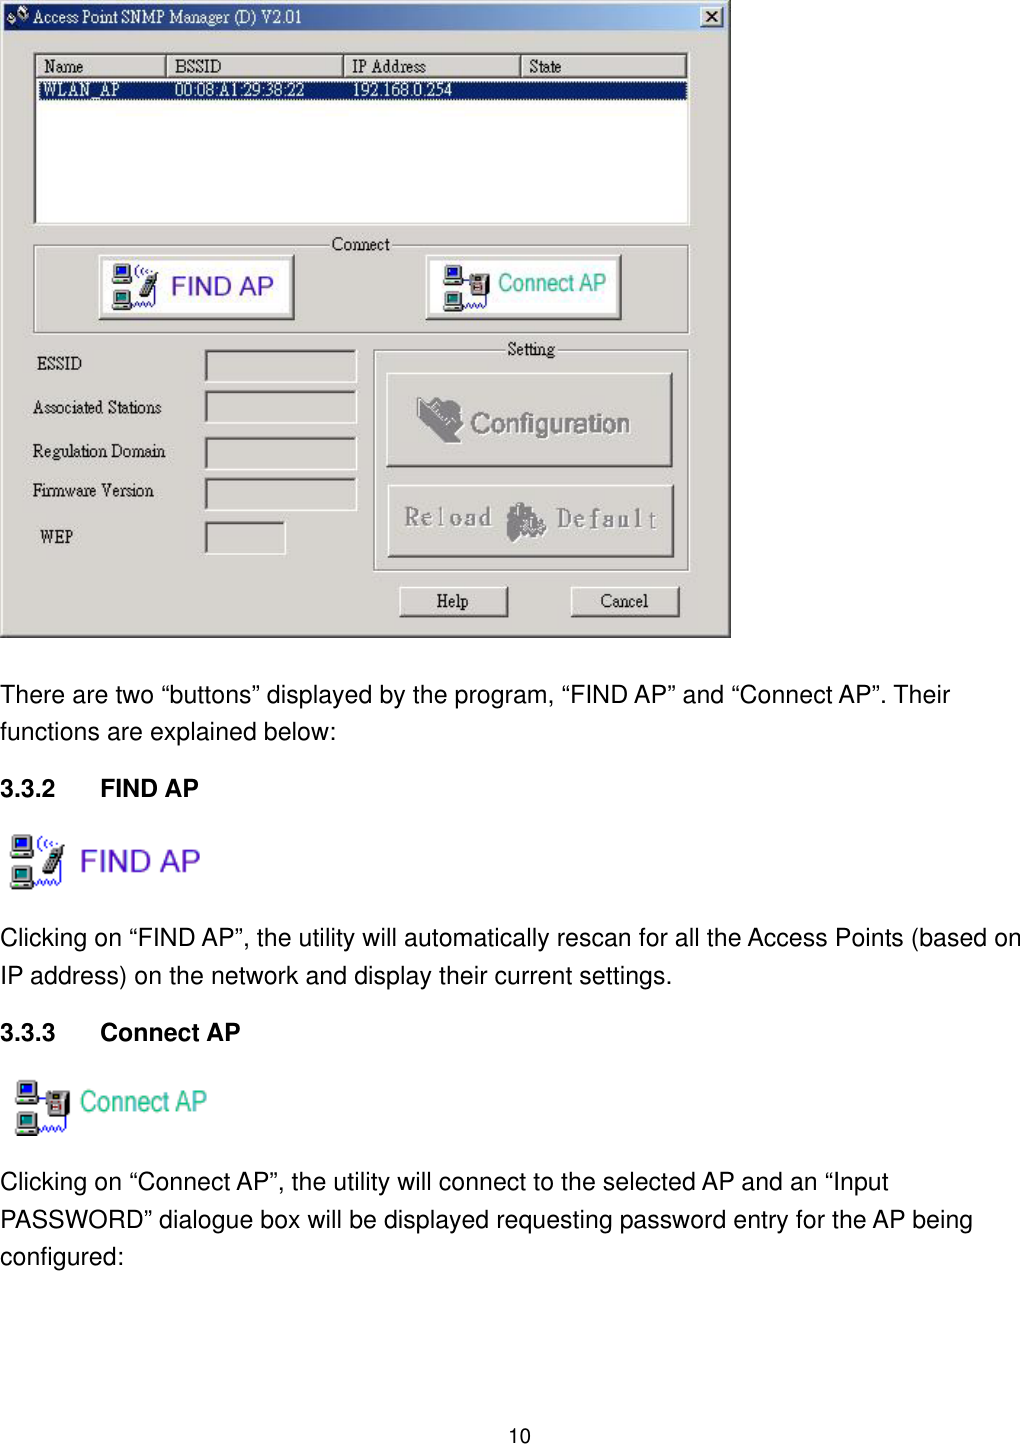  There are two “buttons” displayed by the program, “FIND AP” and “Connect AP”. Their functions are explained below: 3.3.2 FIND AP  Clicking on “FIND AP”, the utility will automatically rescan for all the Access Points (based on IP address) on the network and display their current settings. 3.3.3 Connect AP  Clicking on “Connect AP”, the utility will connect to the selected AP and an “Input PASSWORD” dialogue box will be displayed requesting password entry for the AP being configured:  10